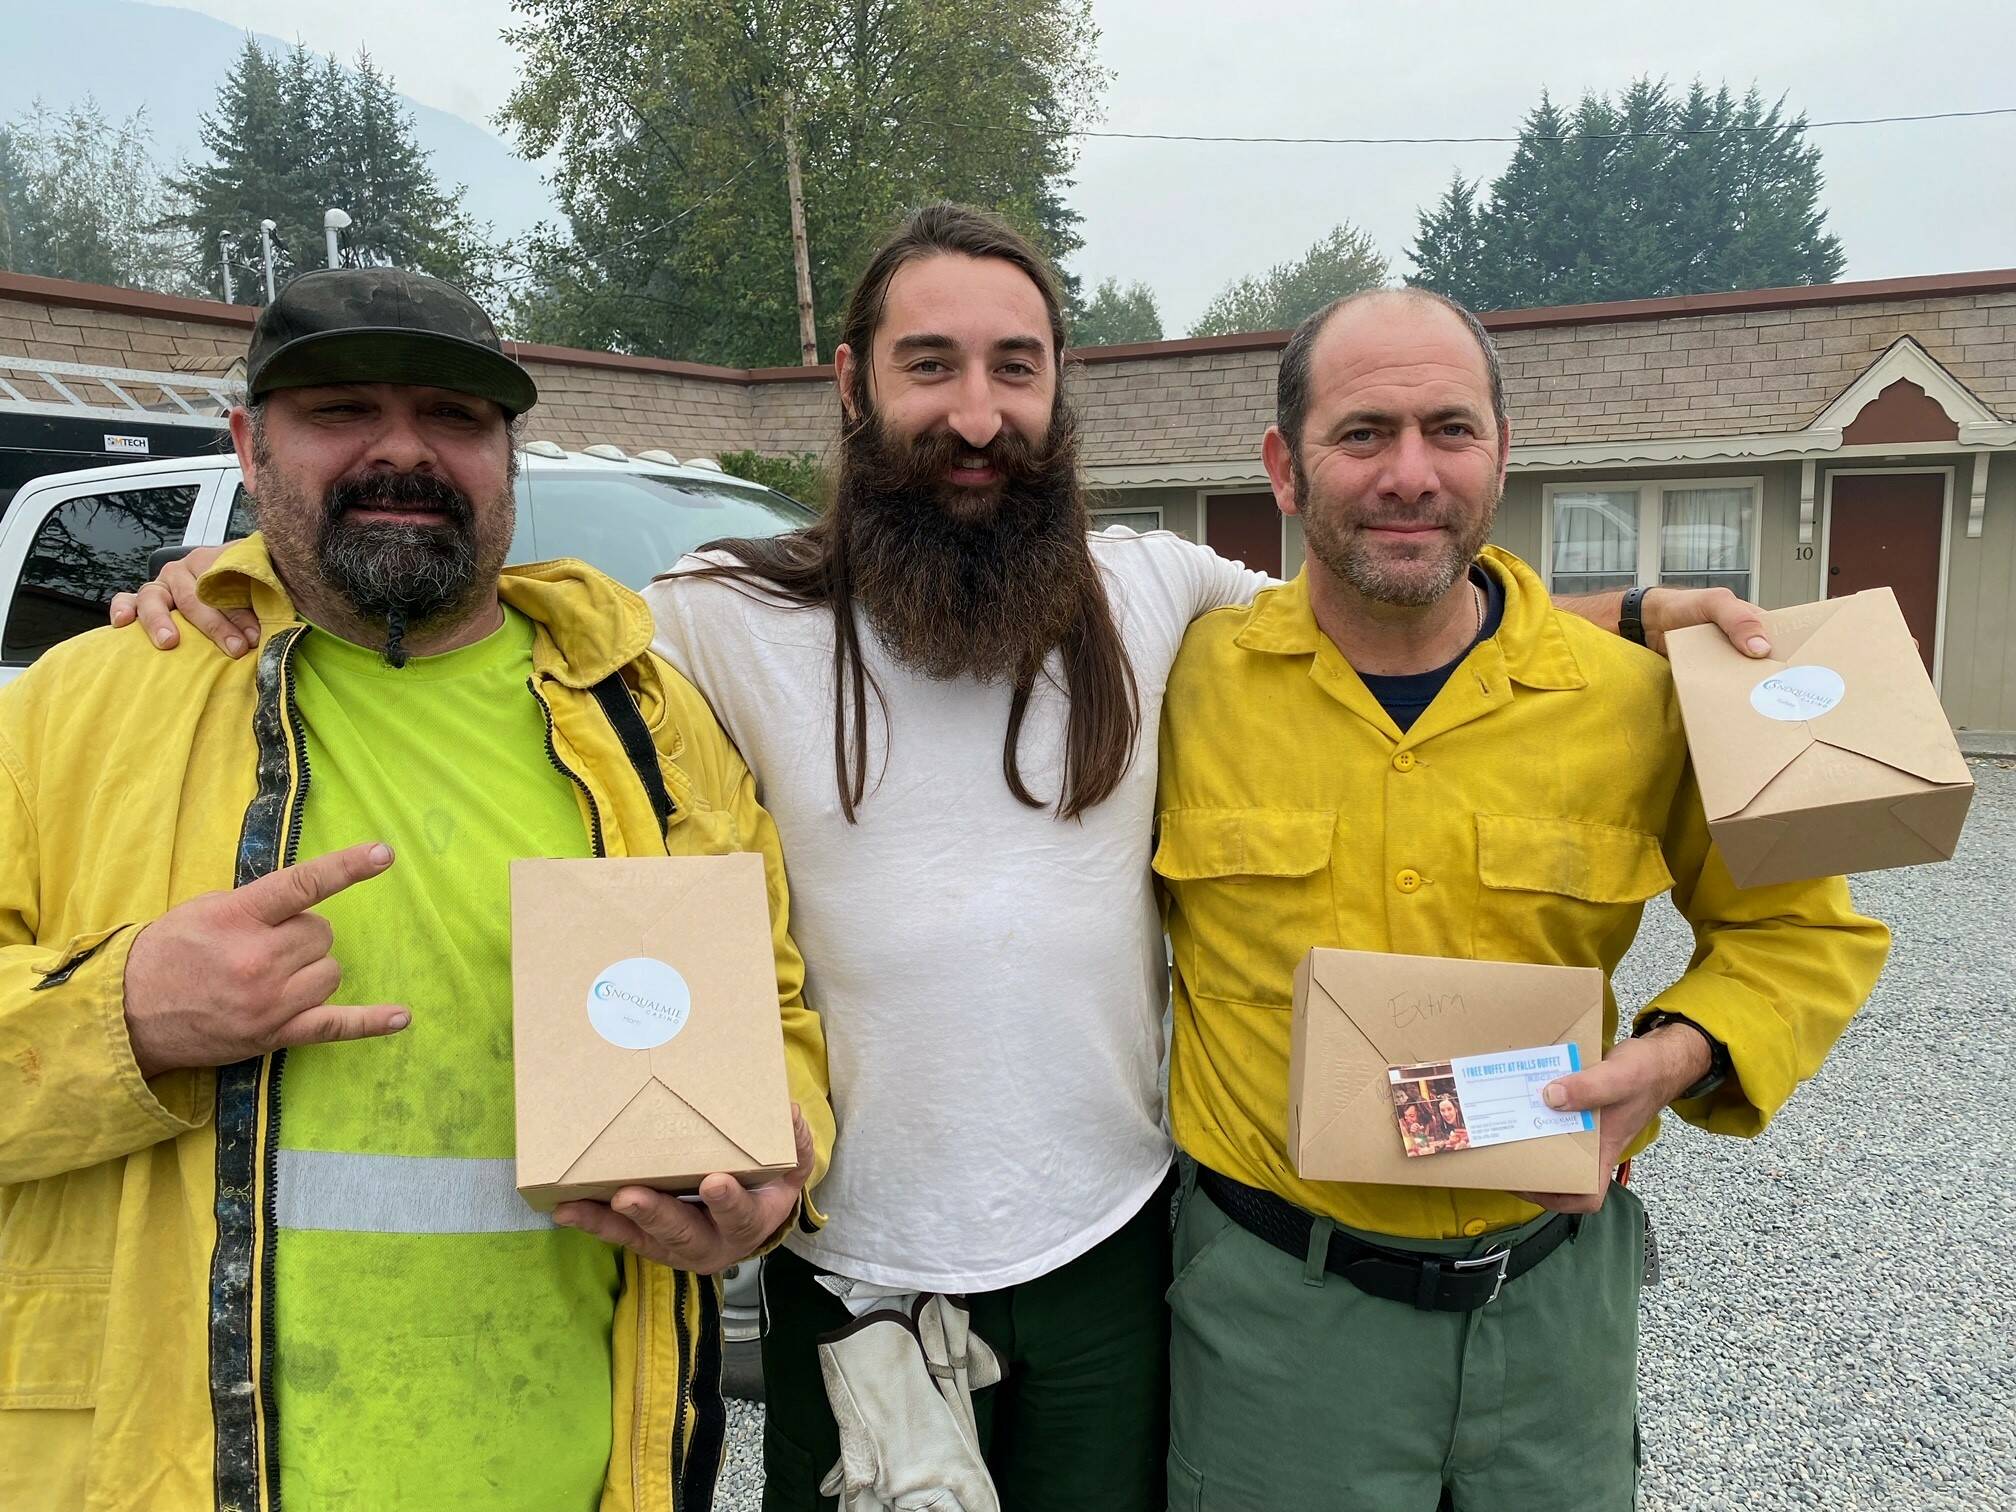 Photo courtesys of Tarah Smigun 
Three firefighters from Methow Valley supporting wildfire fighting efforts outside Snoqualmie receive lunch from Snoqualmie Casino employees. Below, Larell Ezell, of the Snoqualmie Casino, spearheads lunch assembly for firefighters.